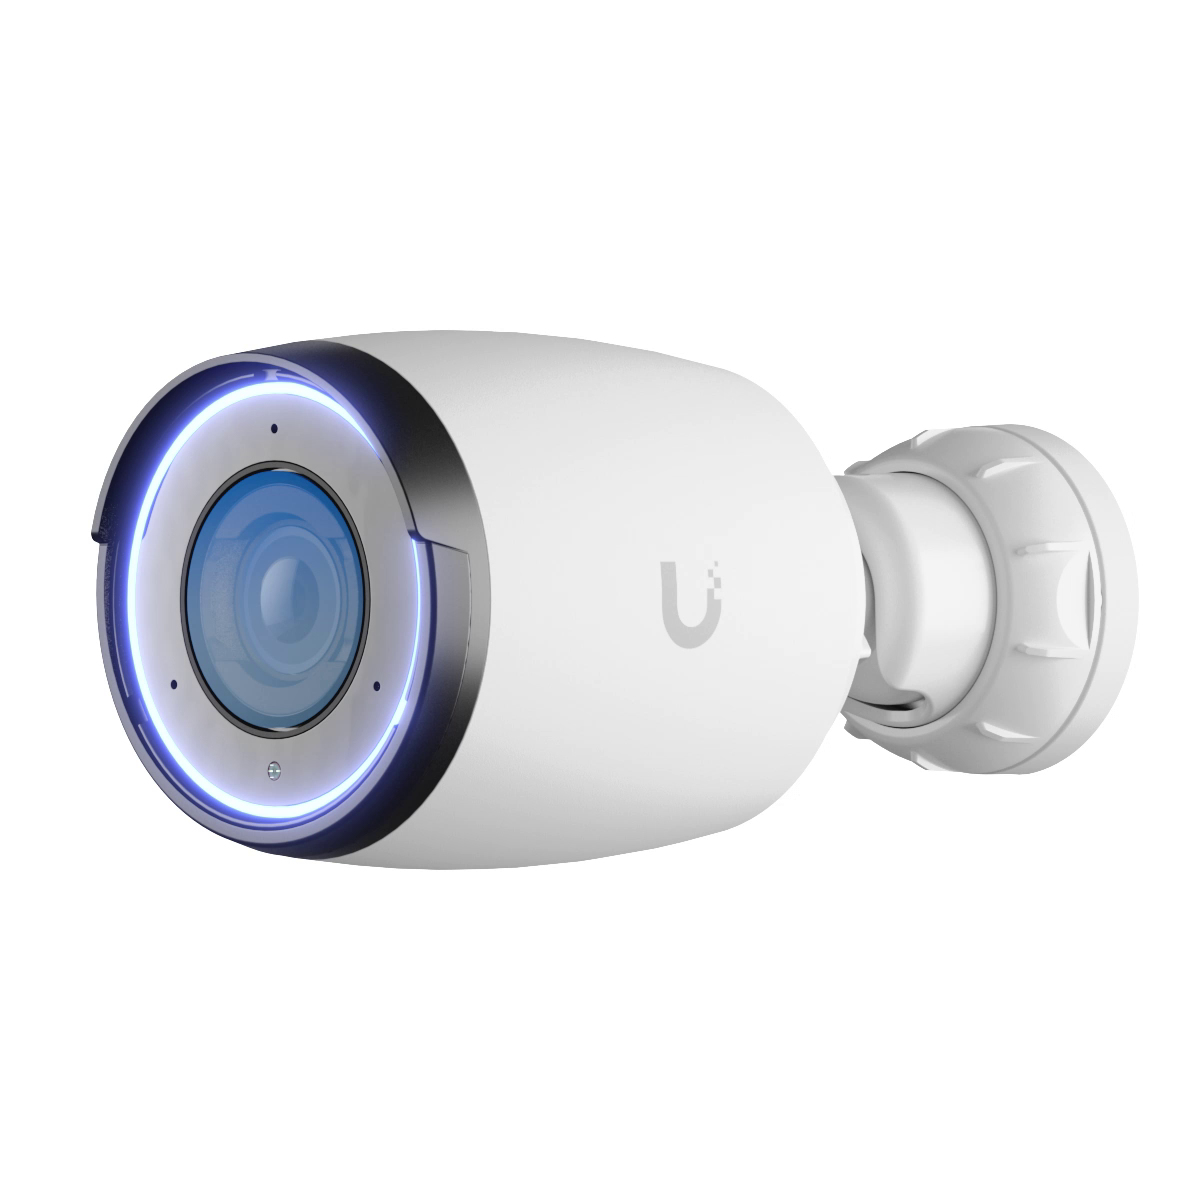 UVC-AI-PRO-WHITE UBIQUITI NETWORKS Indoor/outdoor 4K PoE camera with 3x optical zoom and long-distance smart detection capability